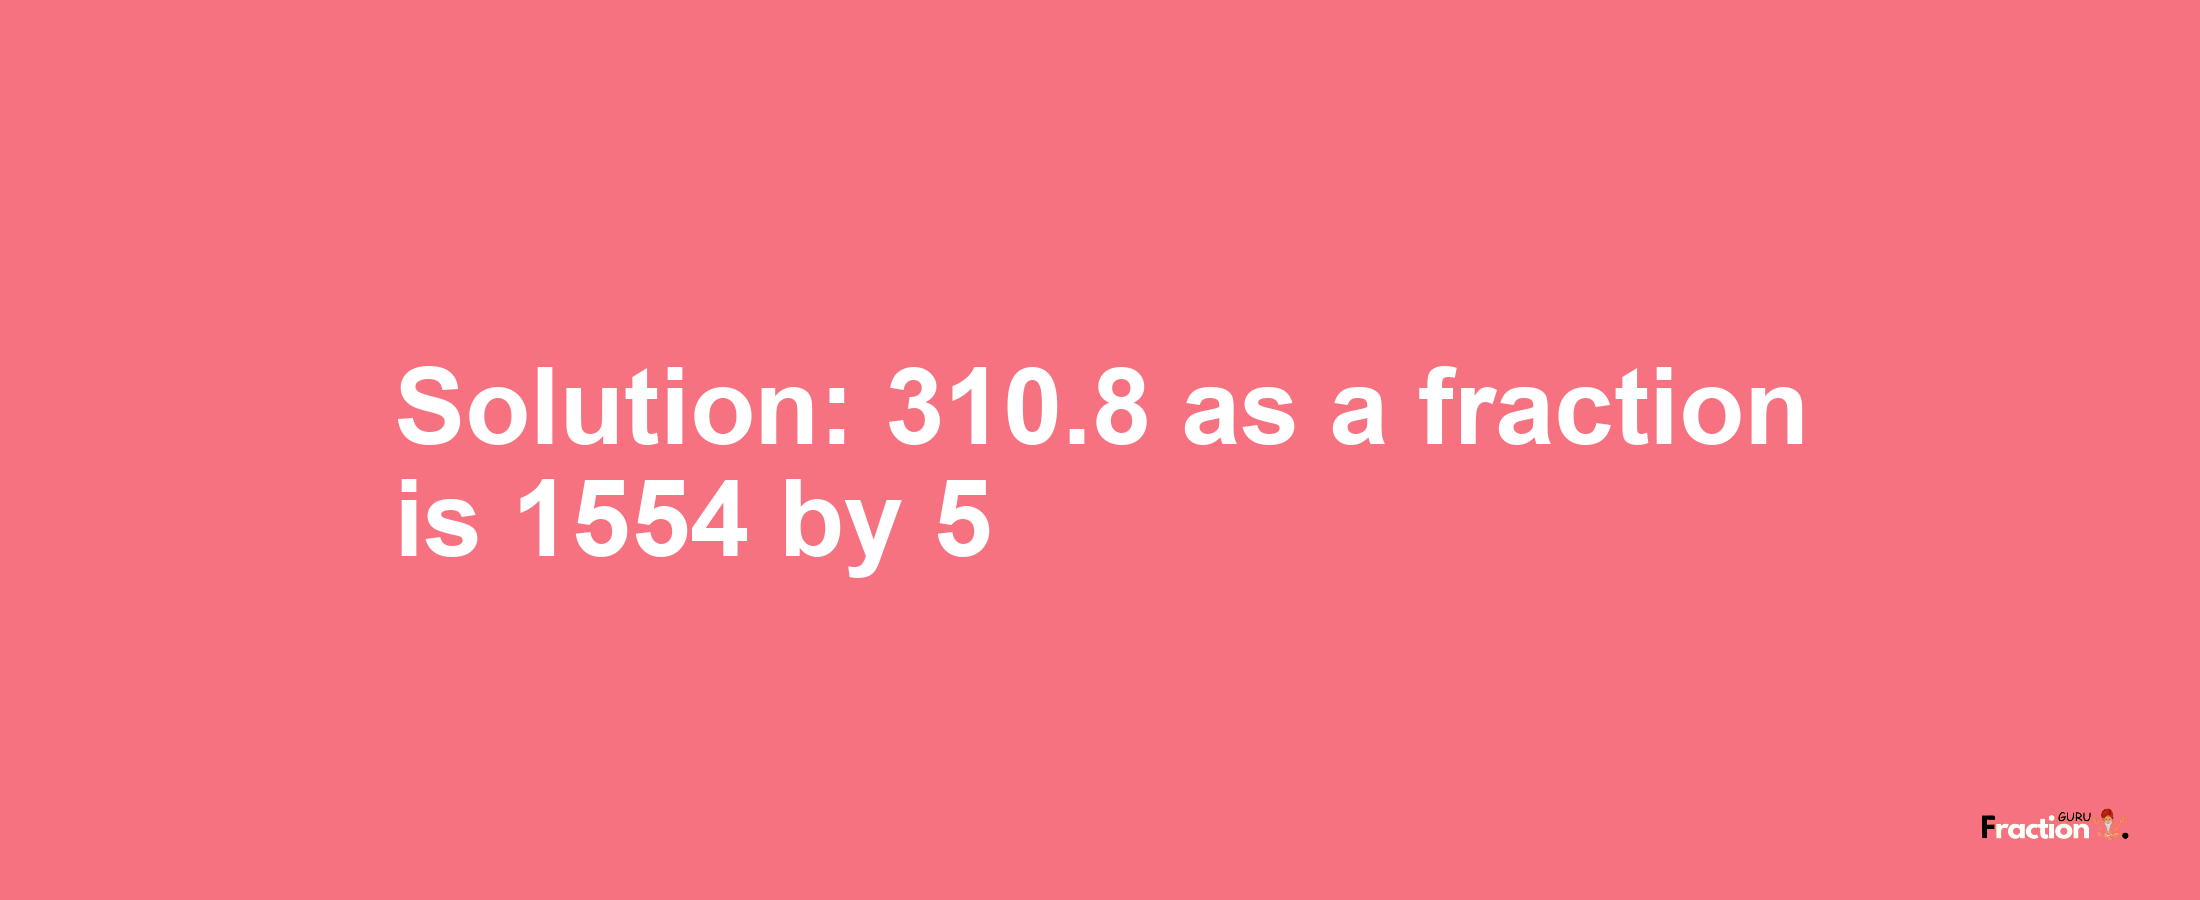 Solution:310.8 as a fraction is 1554/5